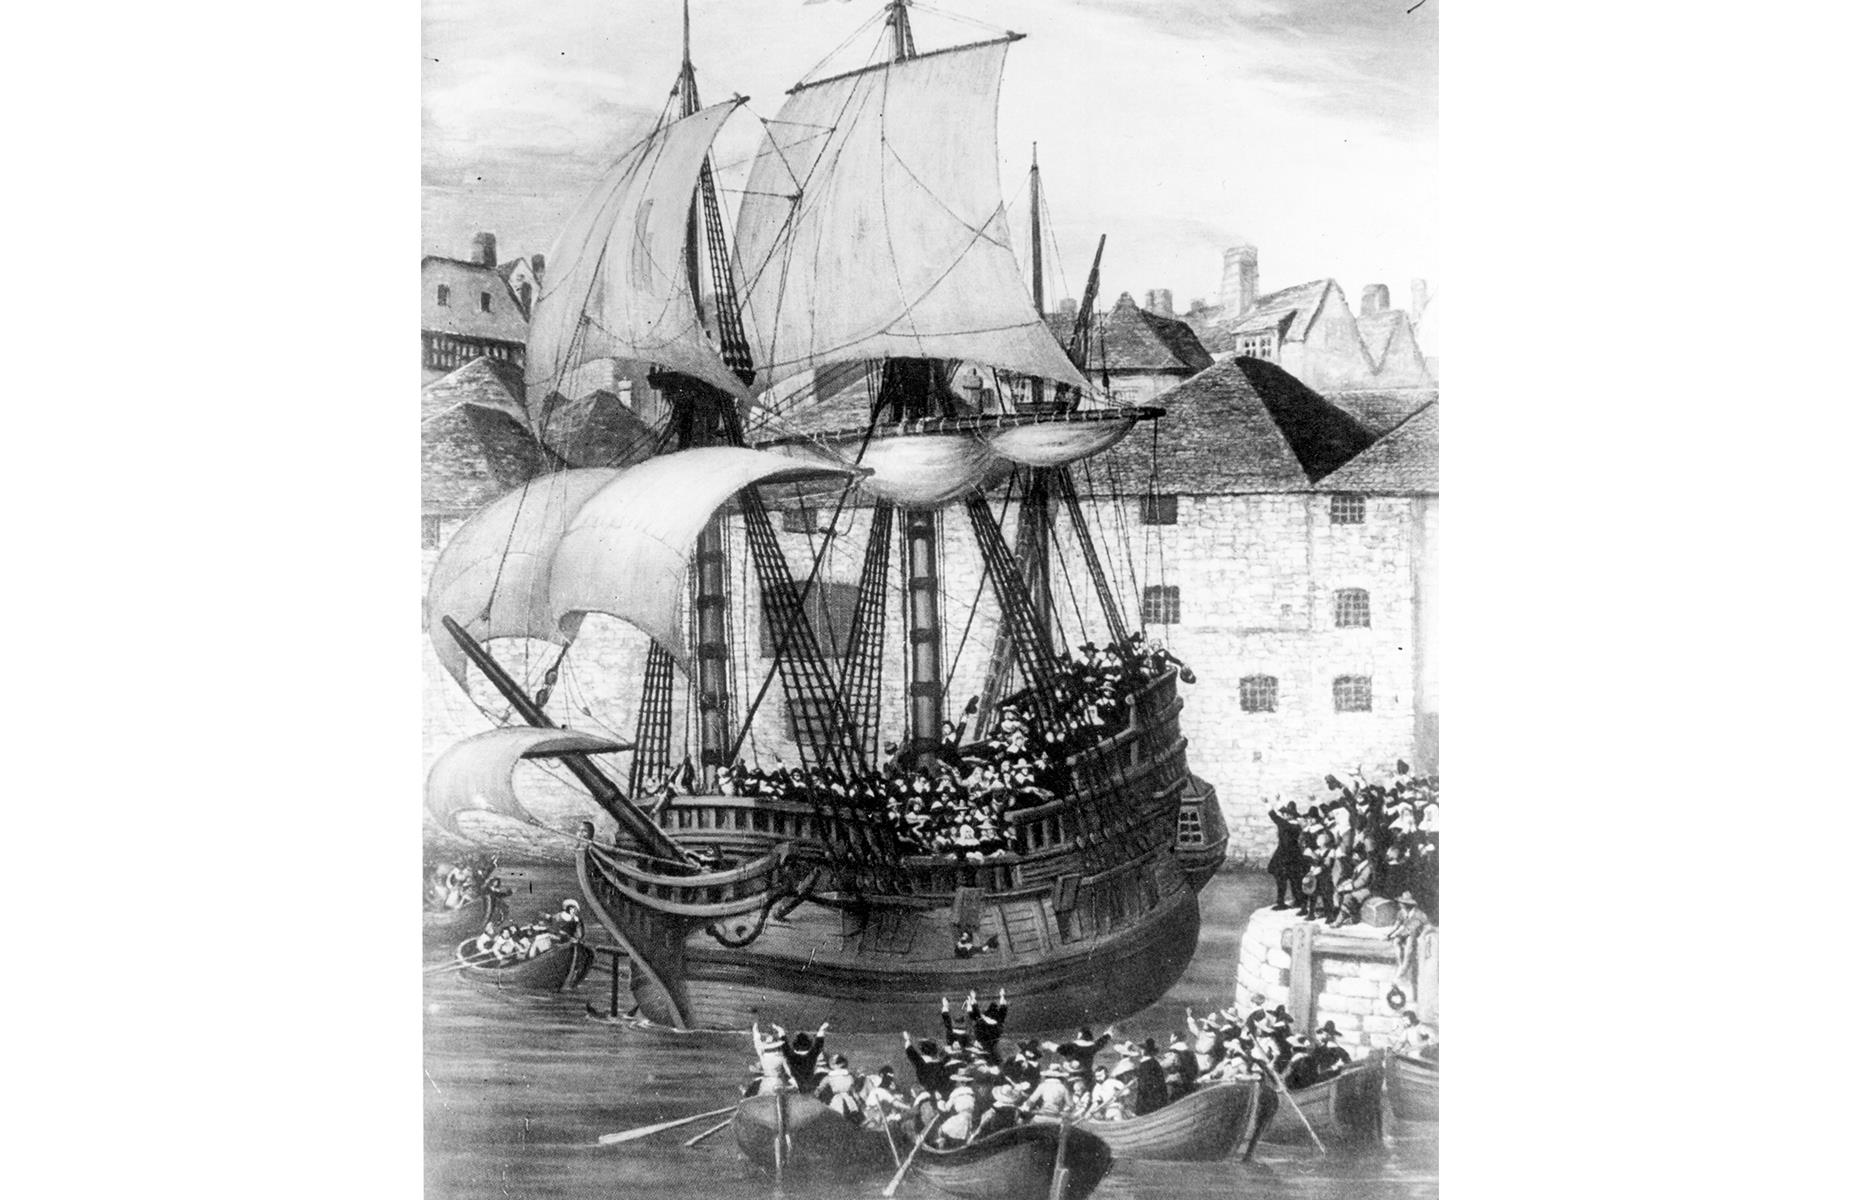 The Mayflower eventually left the port of Plymouth in September (as captured in this drawing). The ship was captained by Christopher Jones (who likely resided in its stern), while the passengers – including key figures like Separatist leader William Brewster – would have made do with the cramped, chilly conditions of the cargo deck.